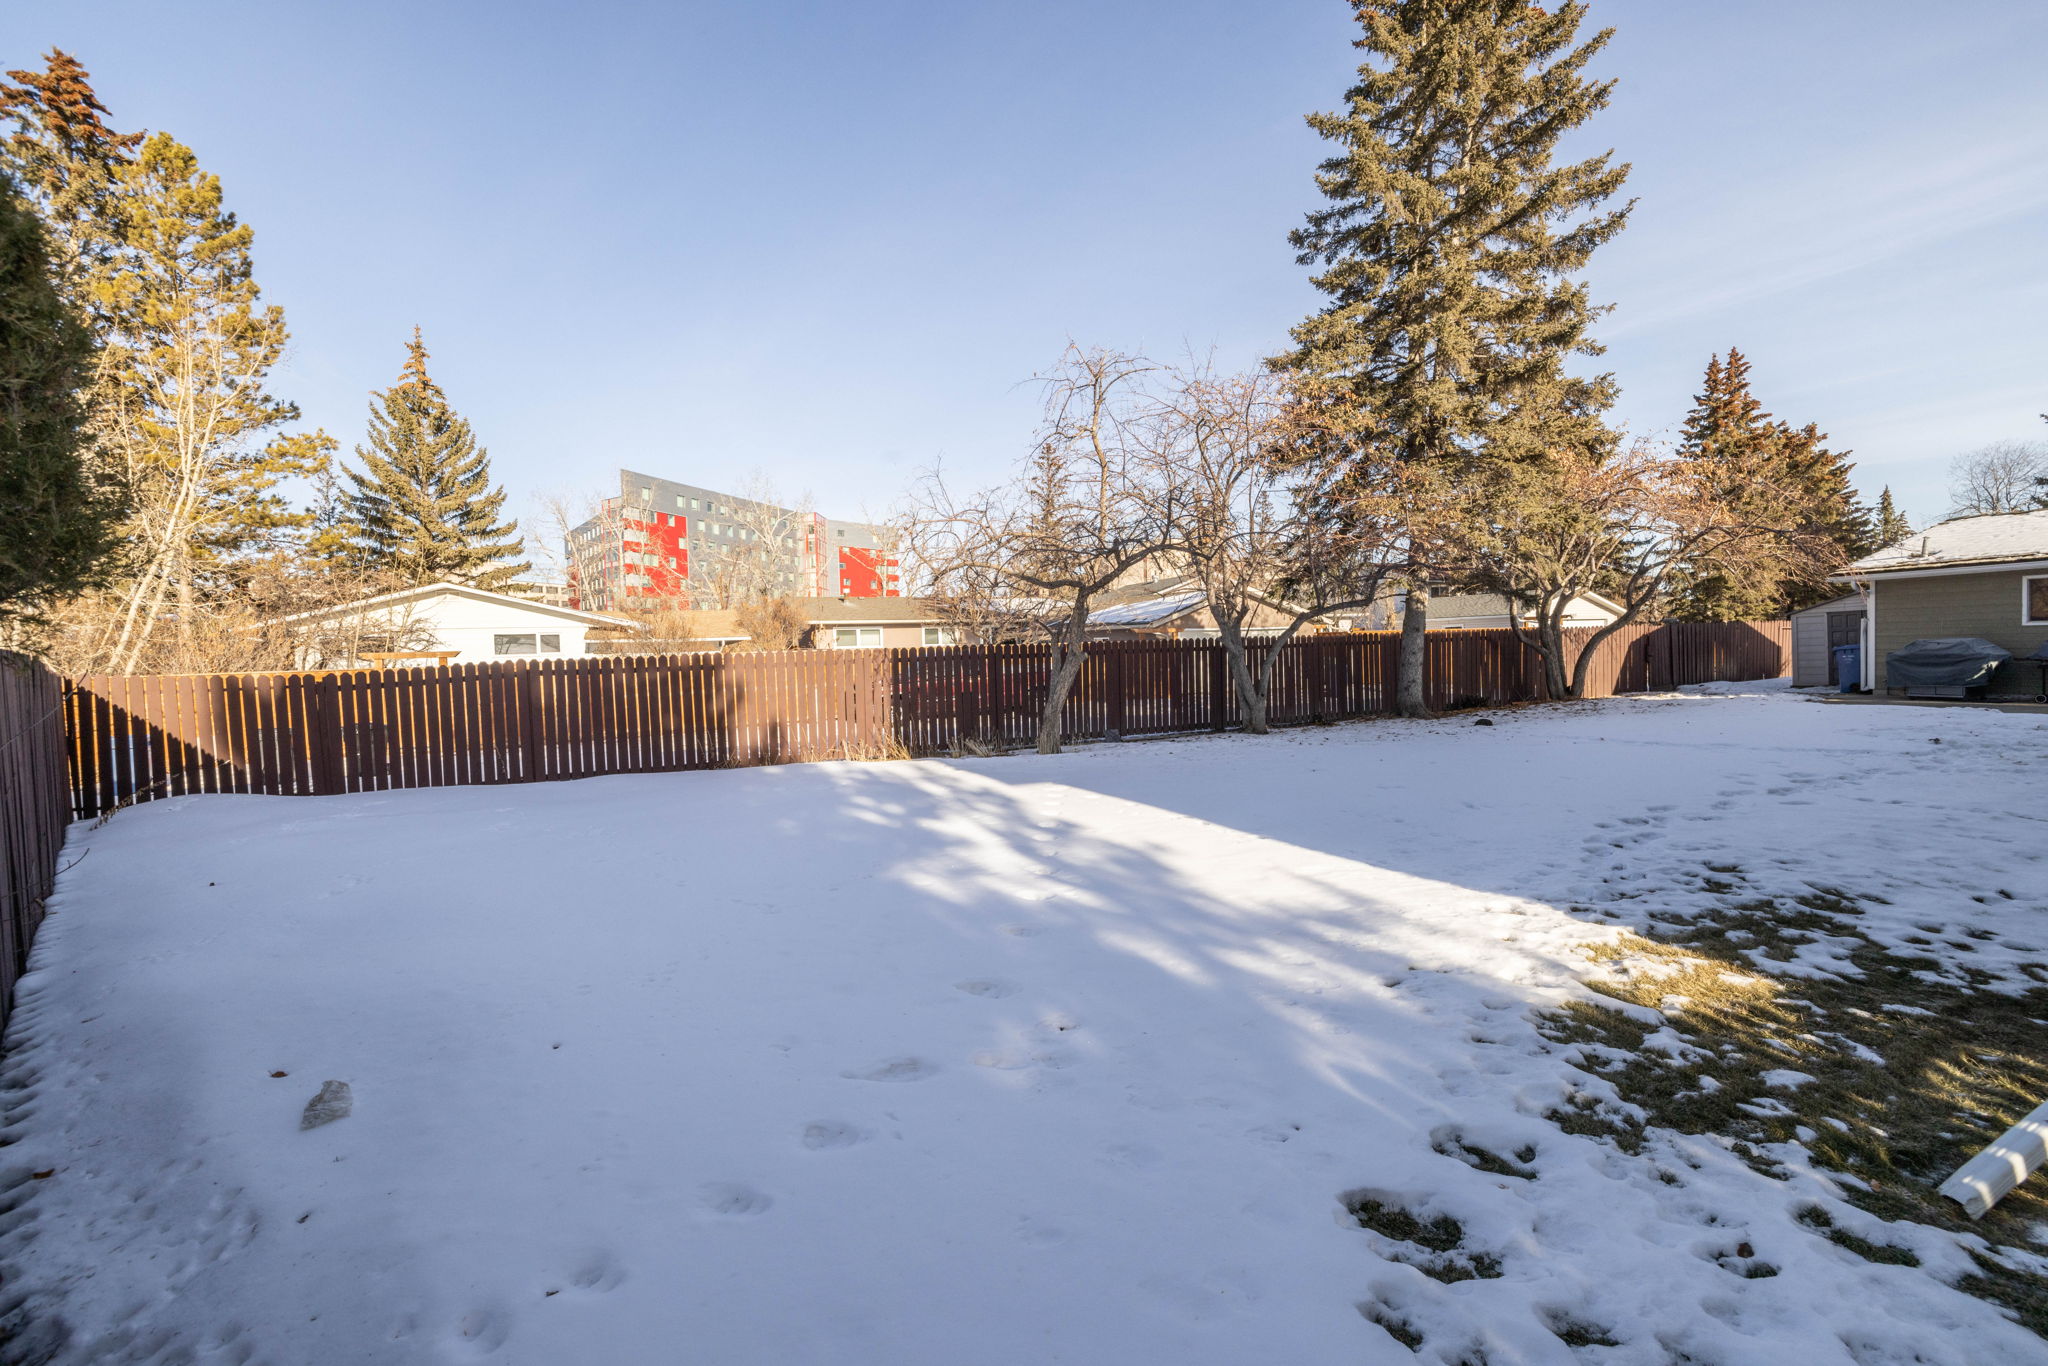 3224 Uplands Pl NW, Calgary, AB T2N 4H1, Canada Photo 81